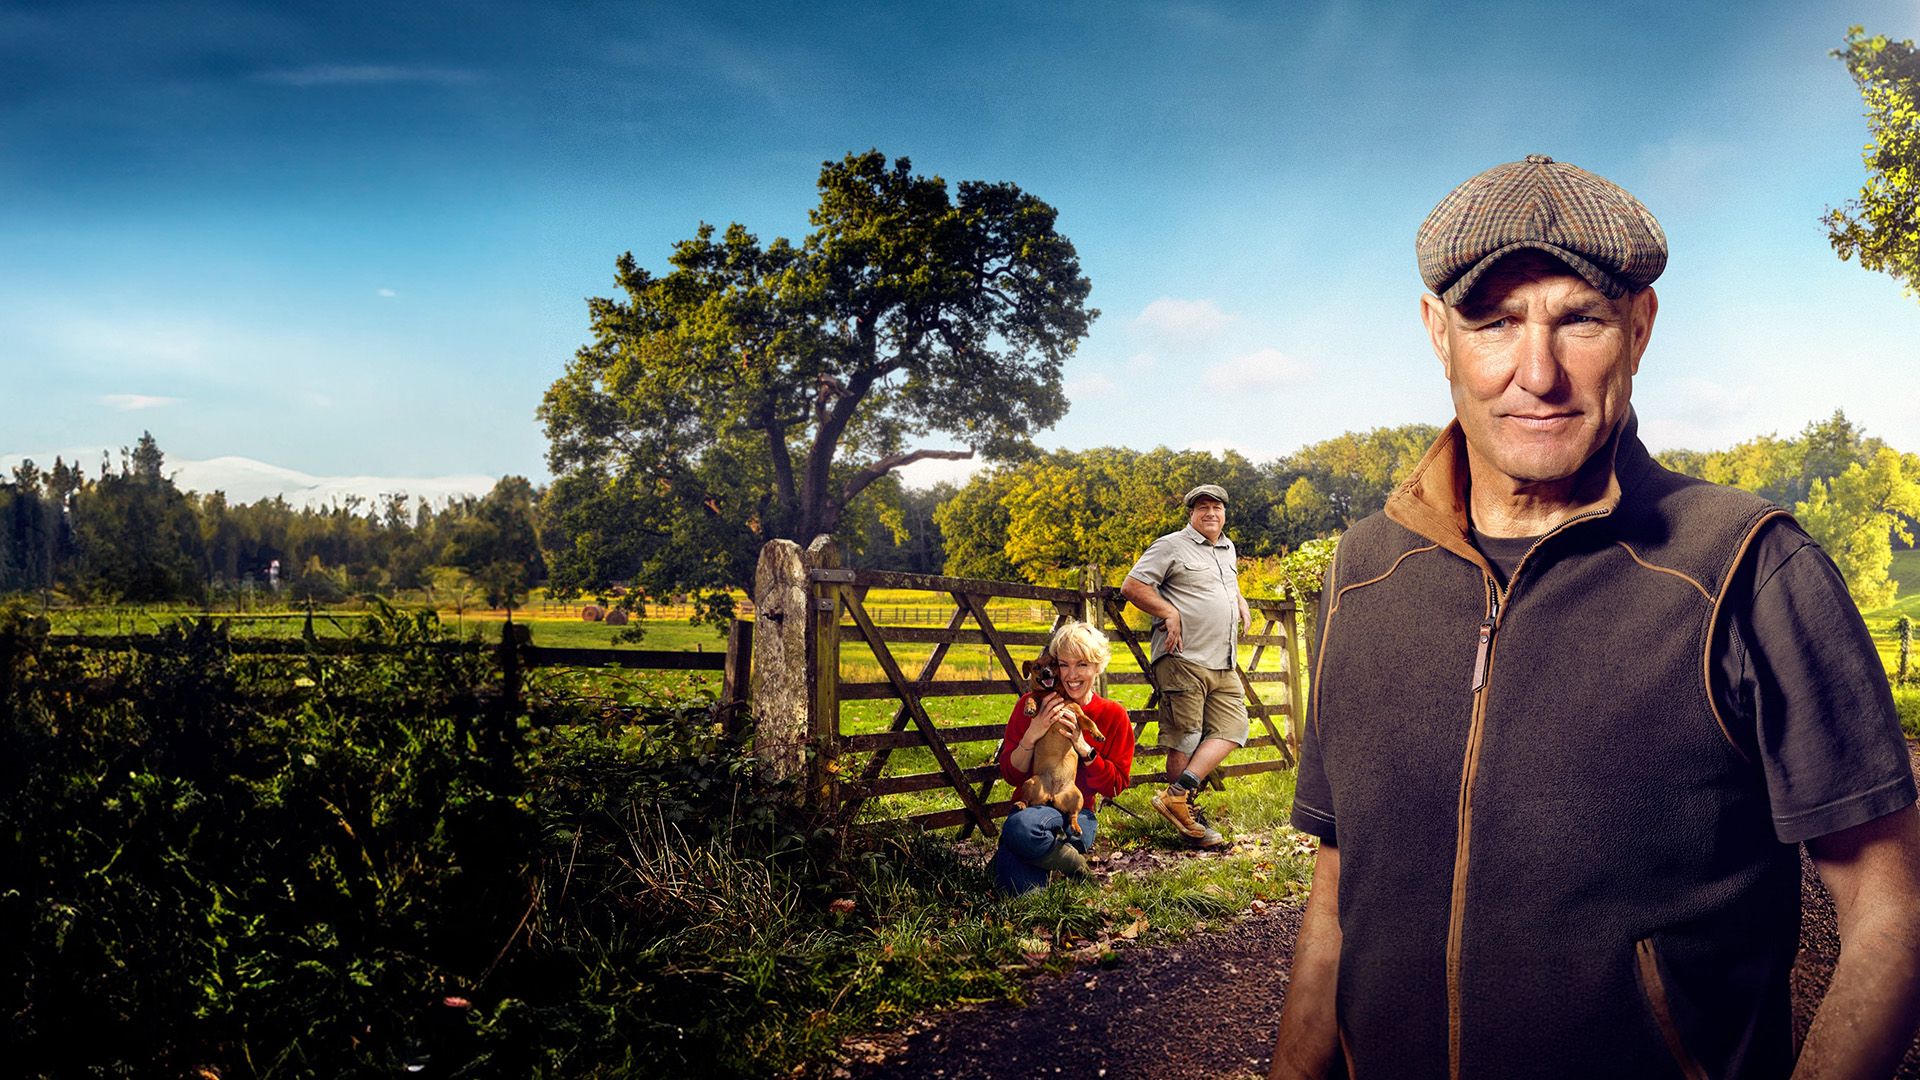 Vinnie Jones in the Country background